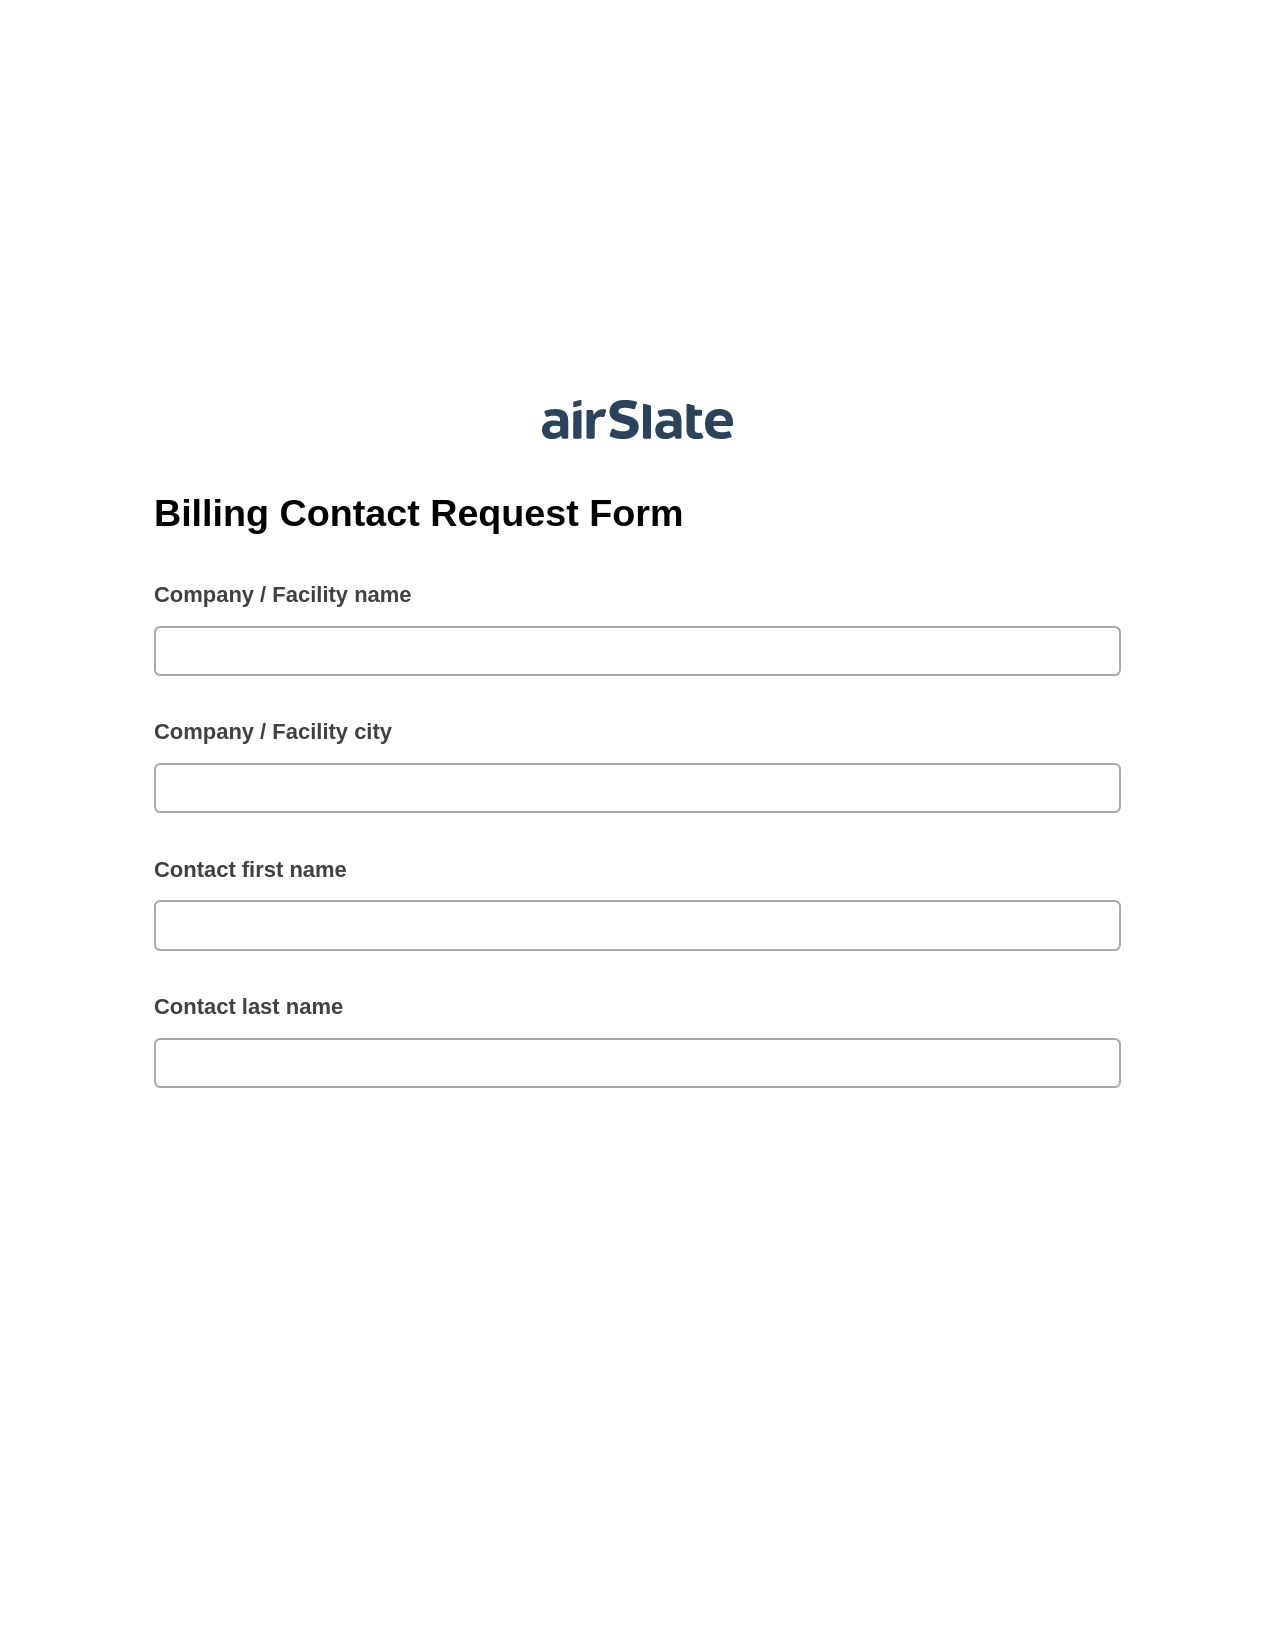 Multirole Billing Contact Request Form Pre-fill from another Slate Bot, Email Notification Bot, Post-finish Document Bot